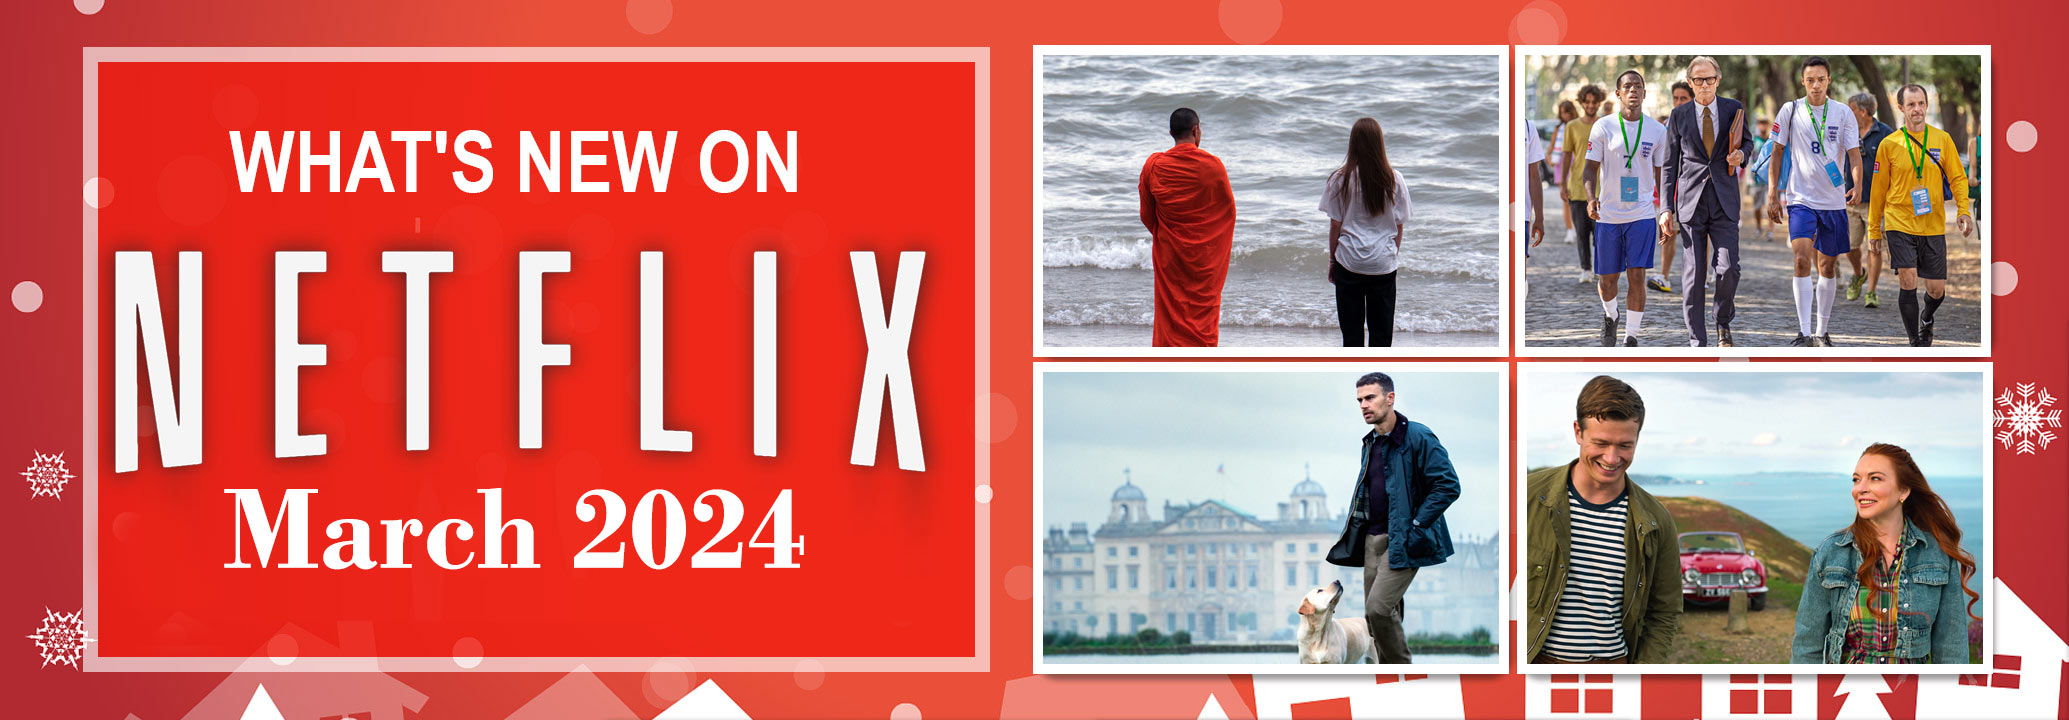 What's New on Netflix March 2024